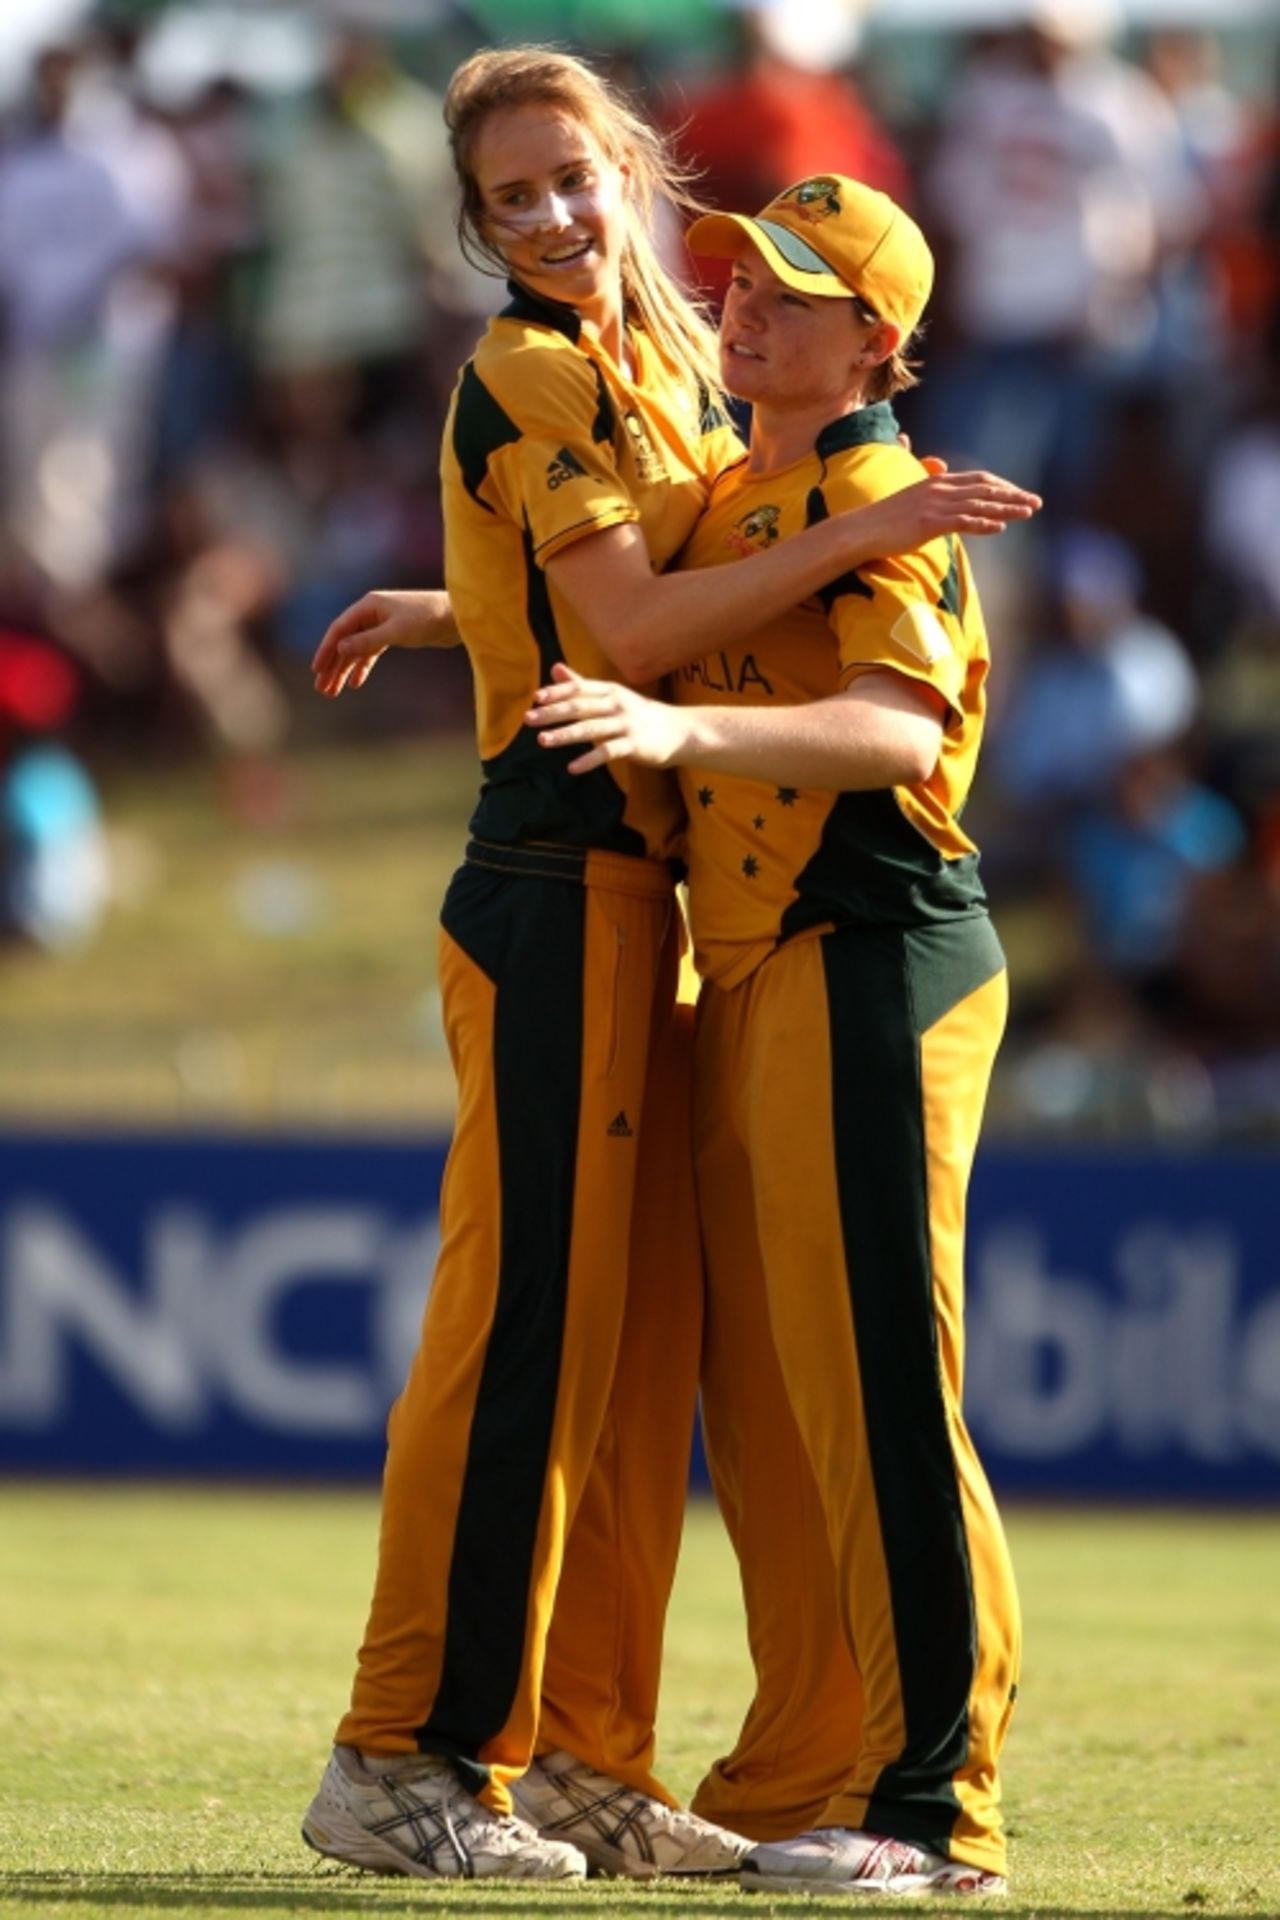 Ellyse Perry picked up two wickets, including Deandra Dottin first ball, as Australia beat West Indies by 9 runs, Australia v West Indies, Women's World Twenty20, Basseterre, May 9, 2010